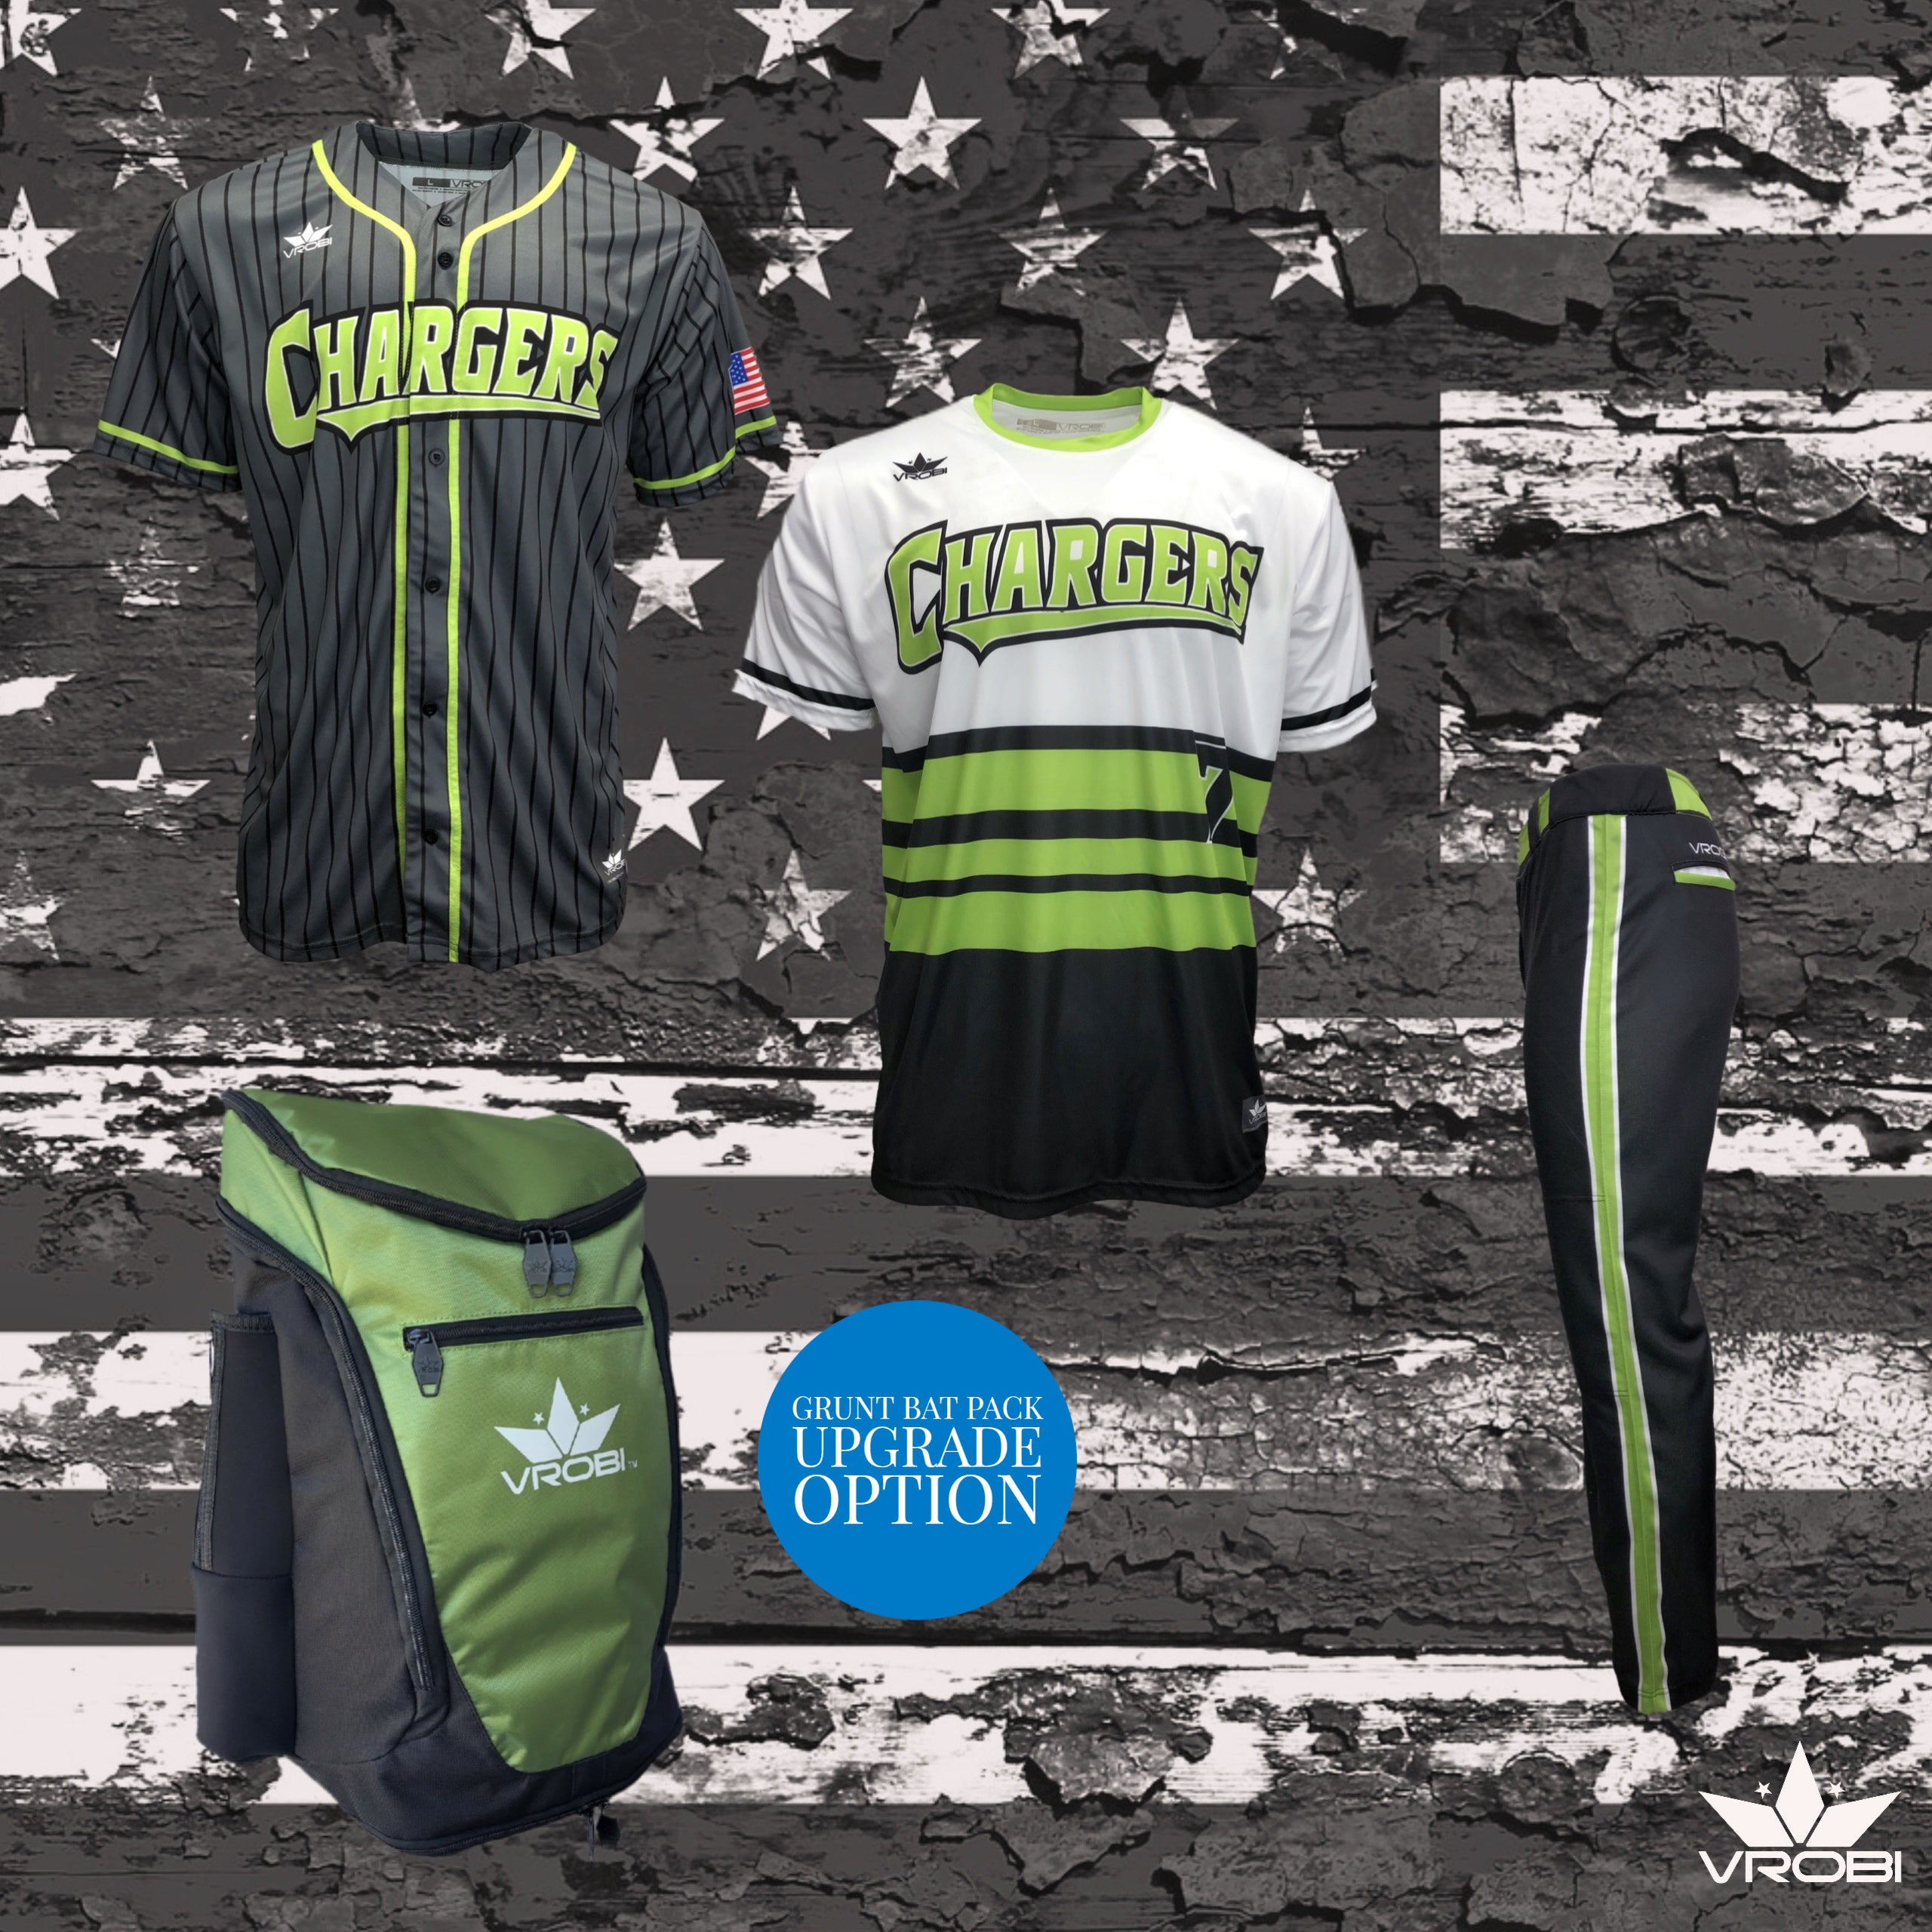 softball uniform packages with bat bag included